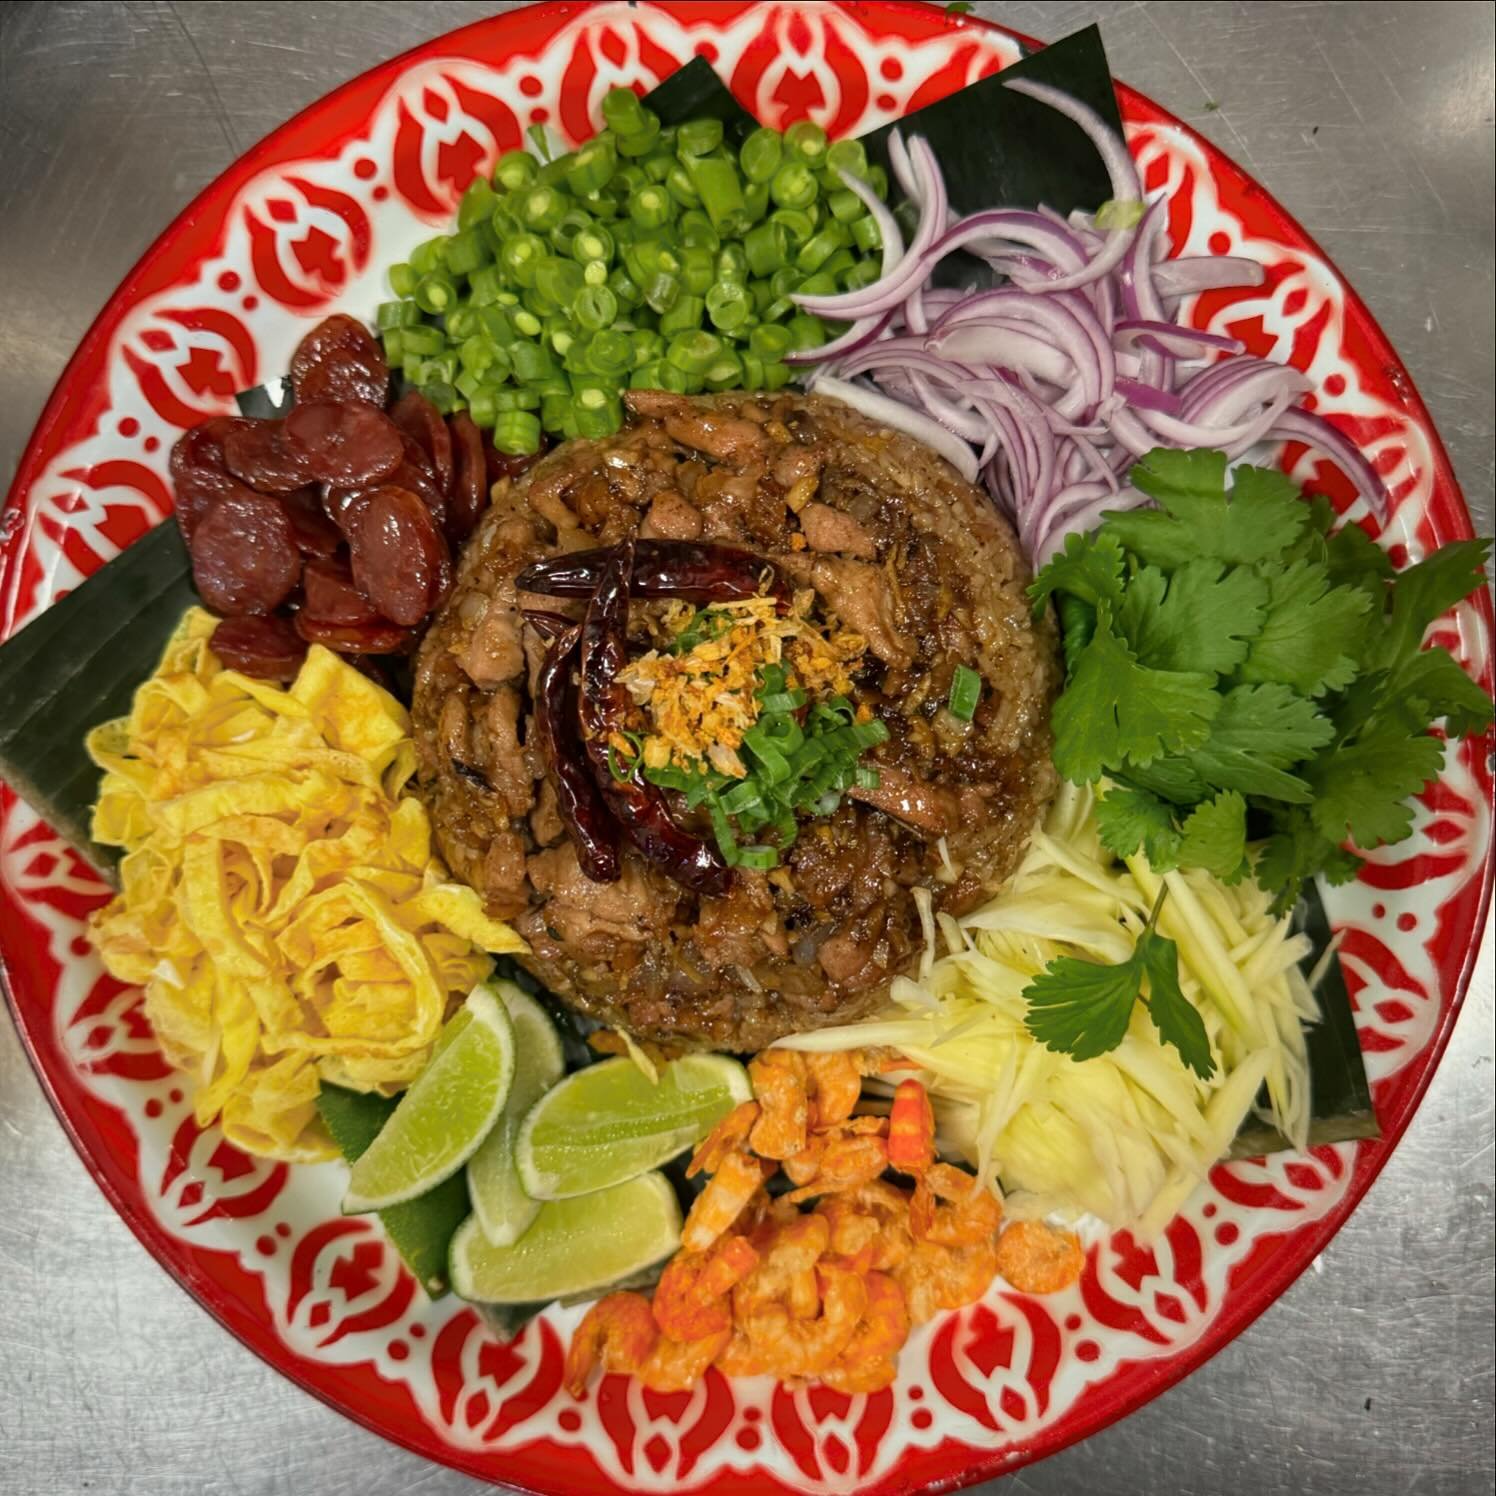 Our new menu now features a 
&ldquo;Large Platters&rdquo; section that includes options to add to your family style dining experience.  Like this Khao Kluk Grapi&hellip;

There&rsquo;s fried rice and then there&rsquo;s this!

Khao Kluk Grapi is a shr